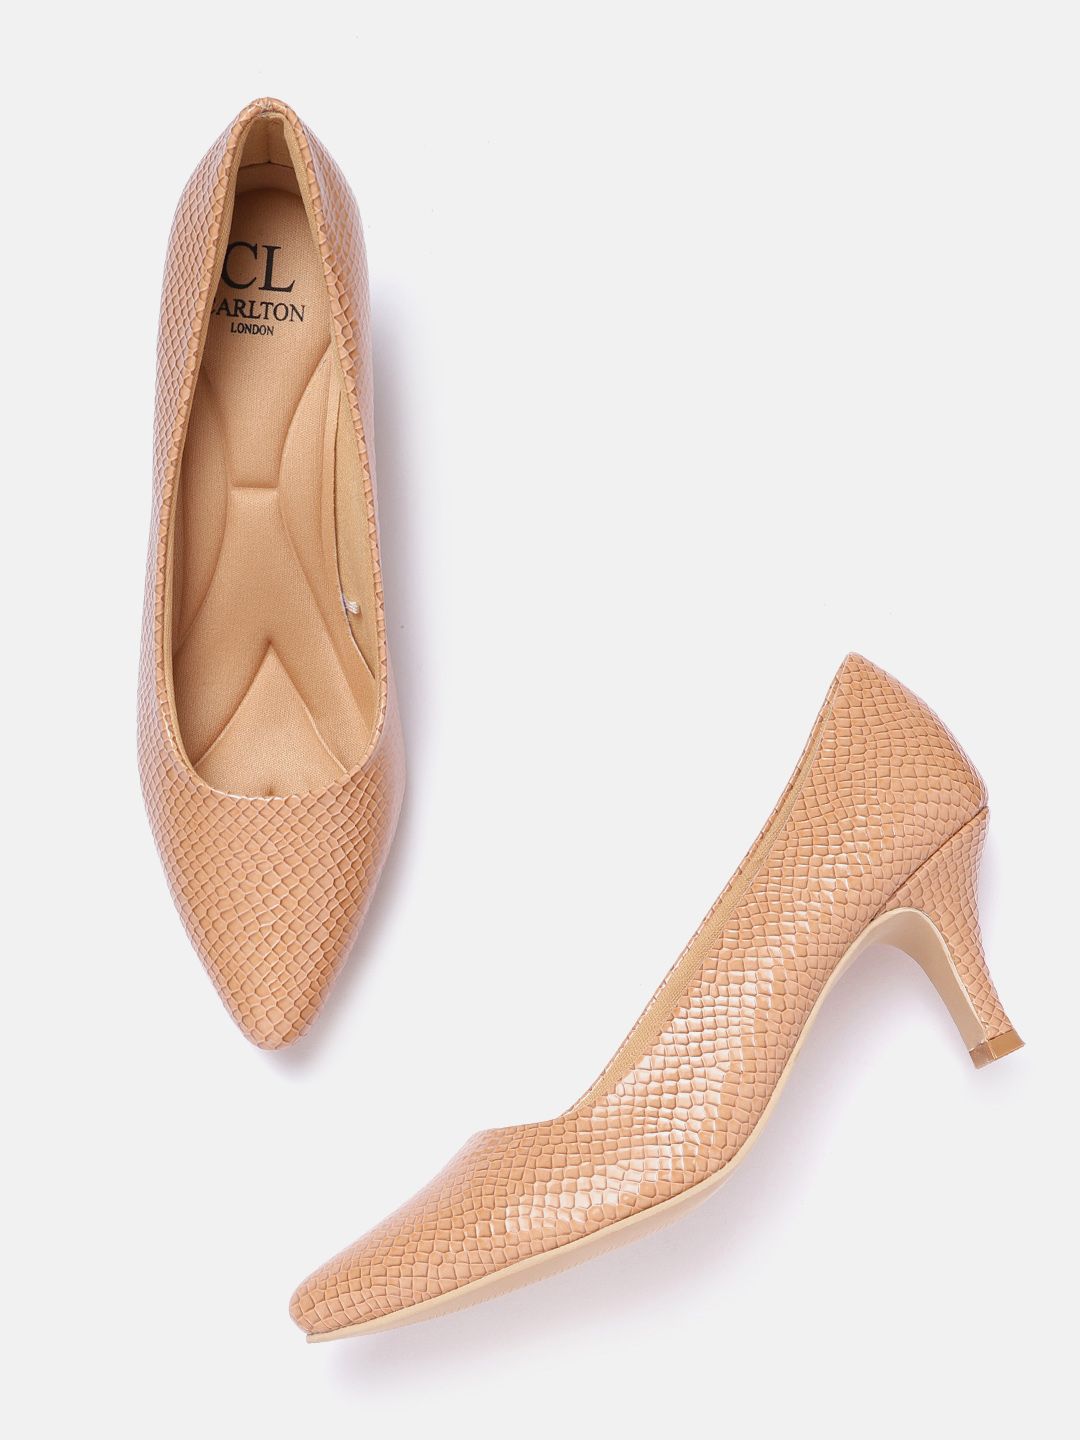 Carlton London Women Nude-Coloured Snake Skin Textured Pumps Price in India